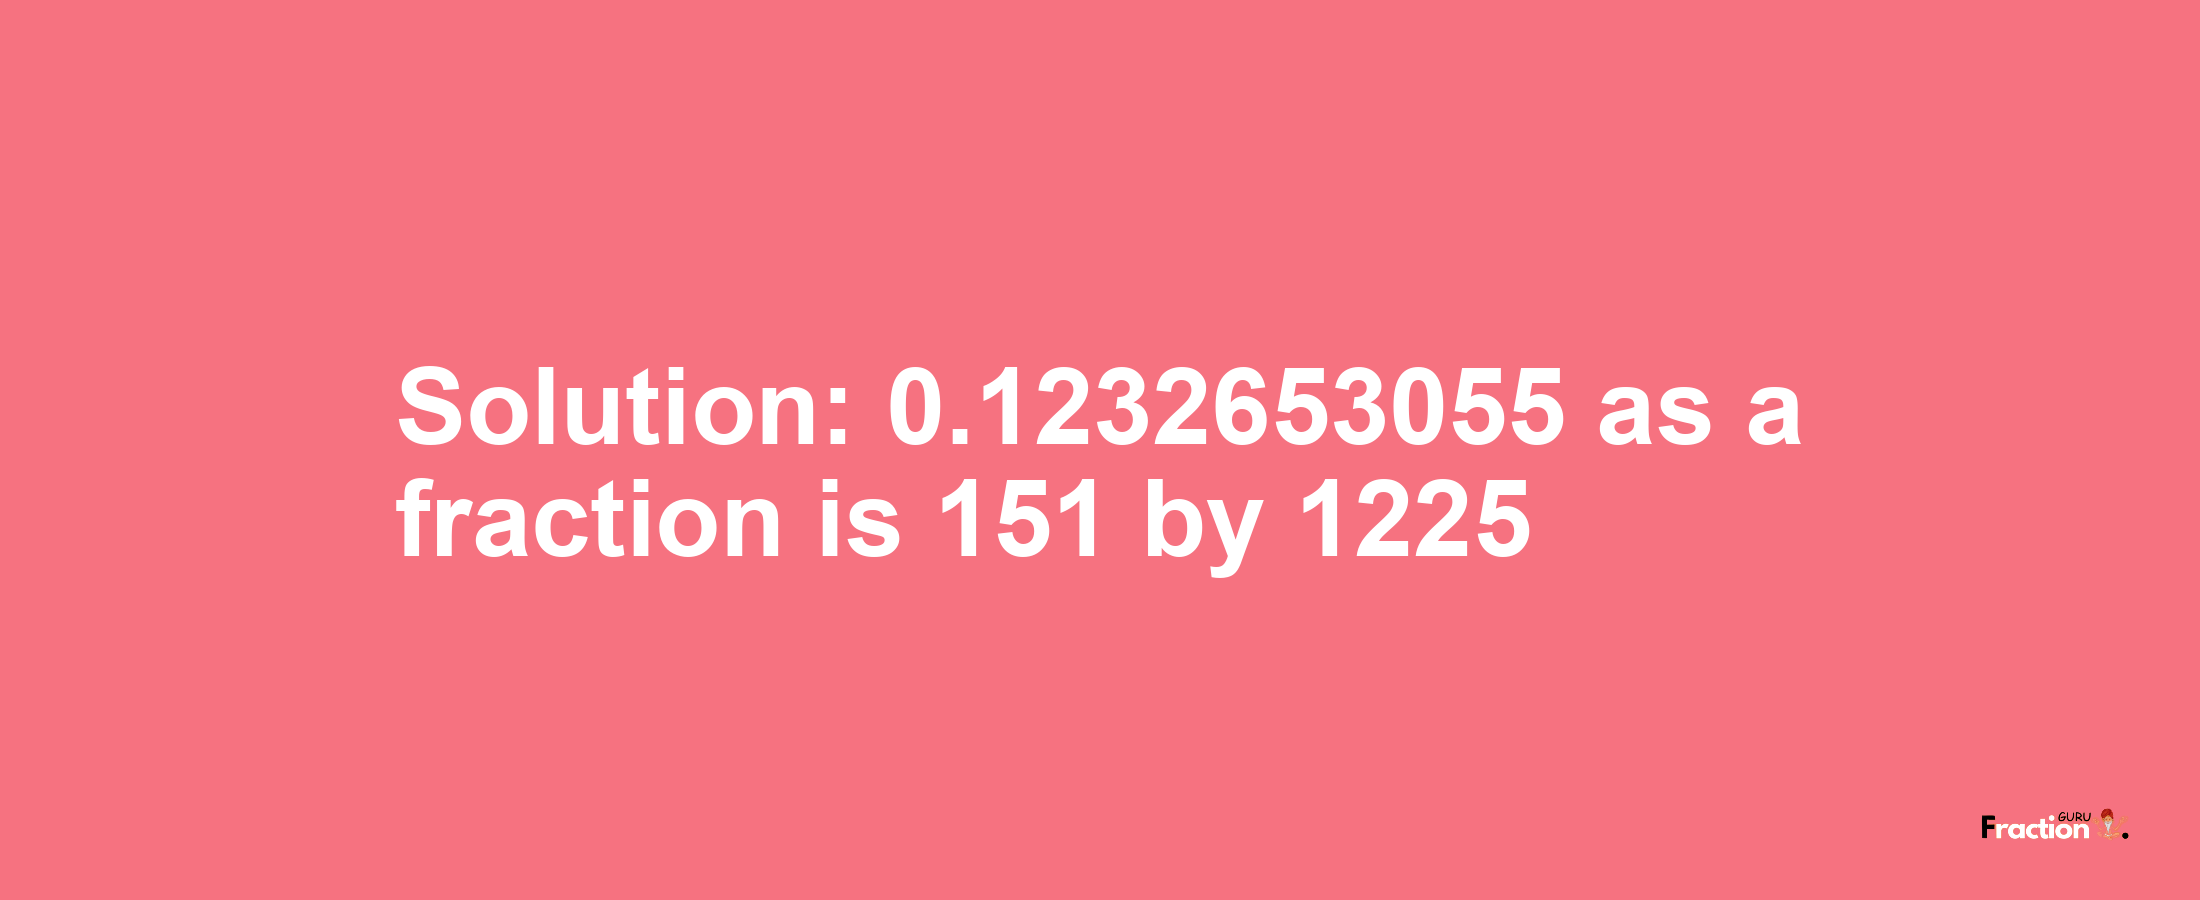 Solution:0.1232653055 as a fraction is 151/1225